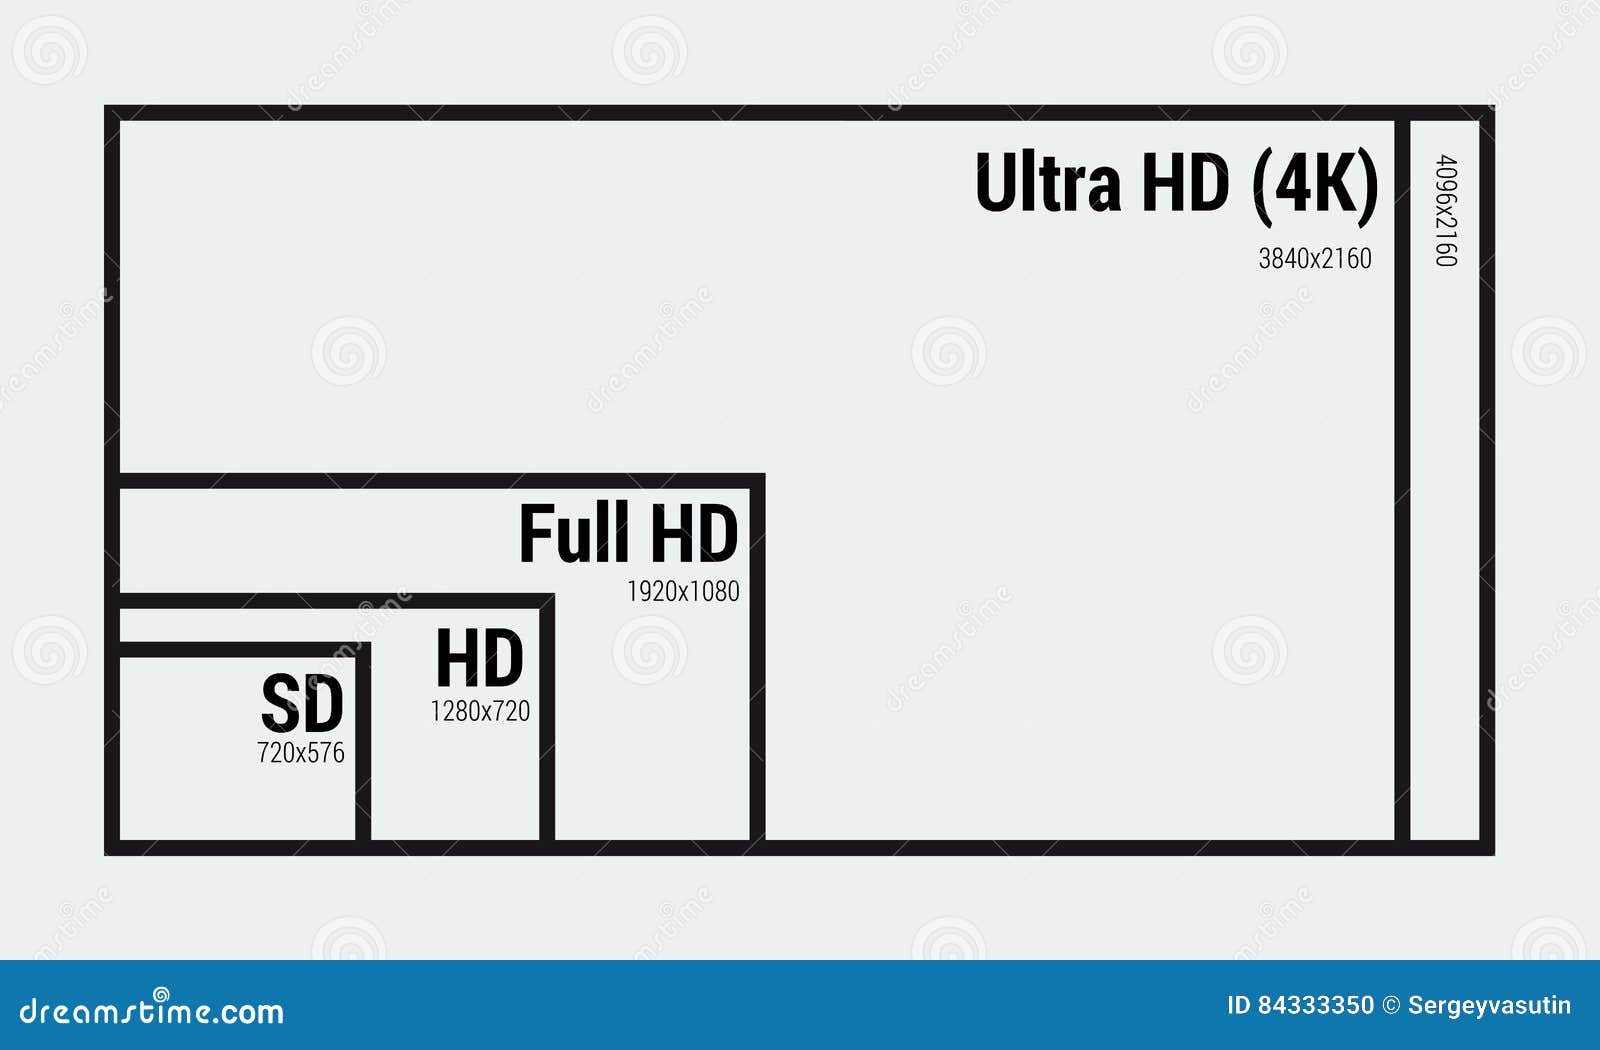 Monitor Size And Resolution Chart